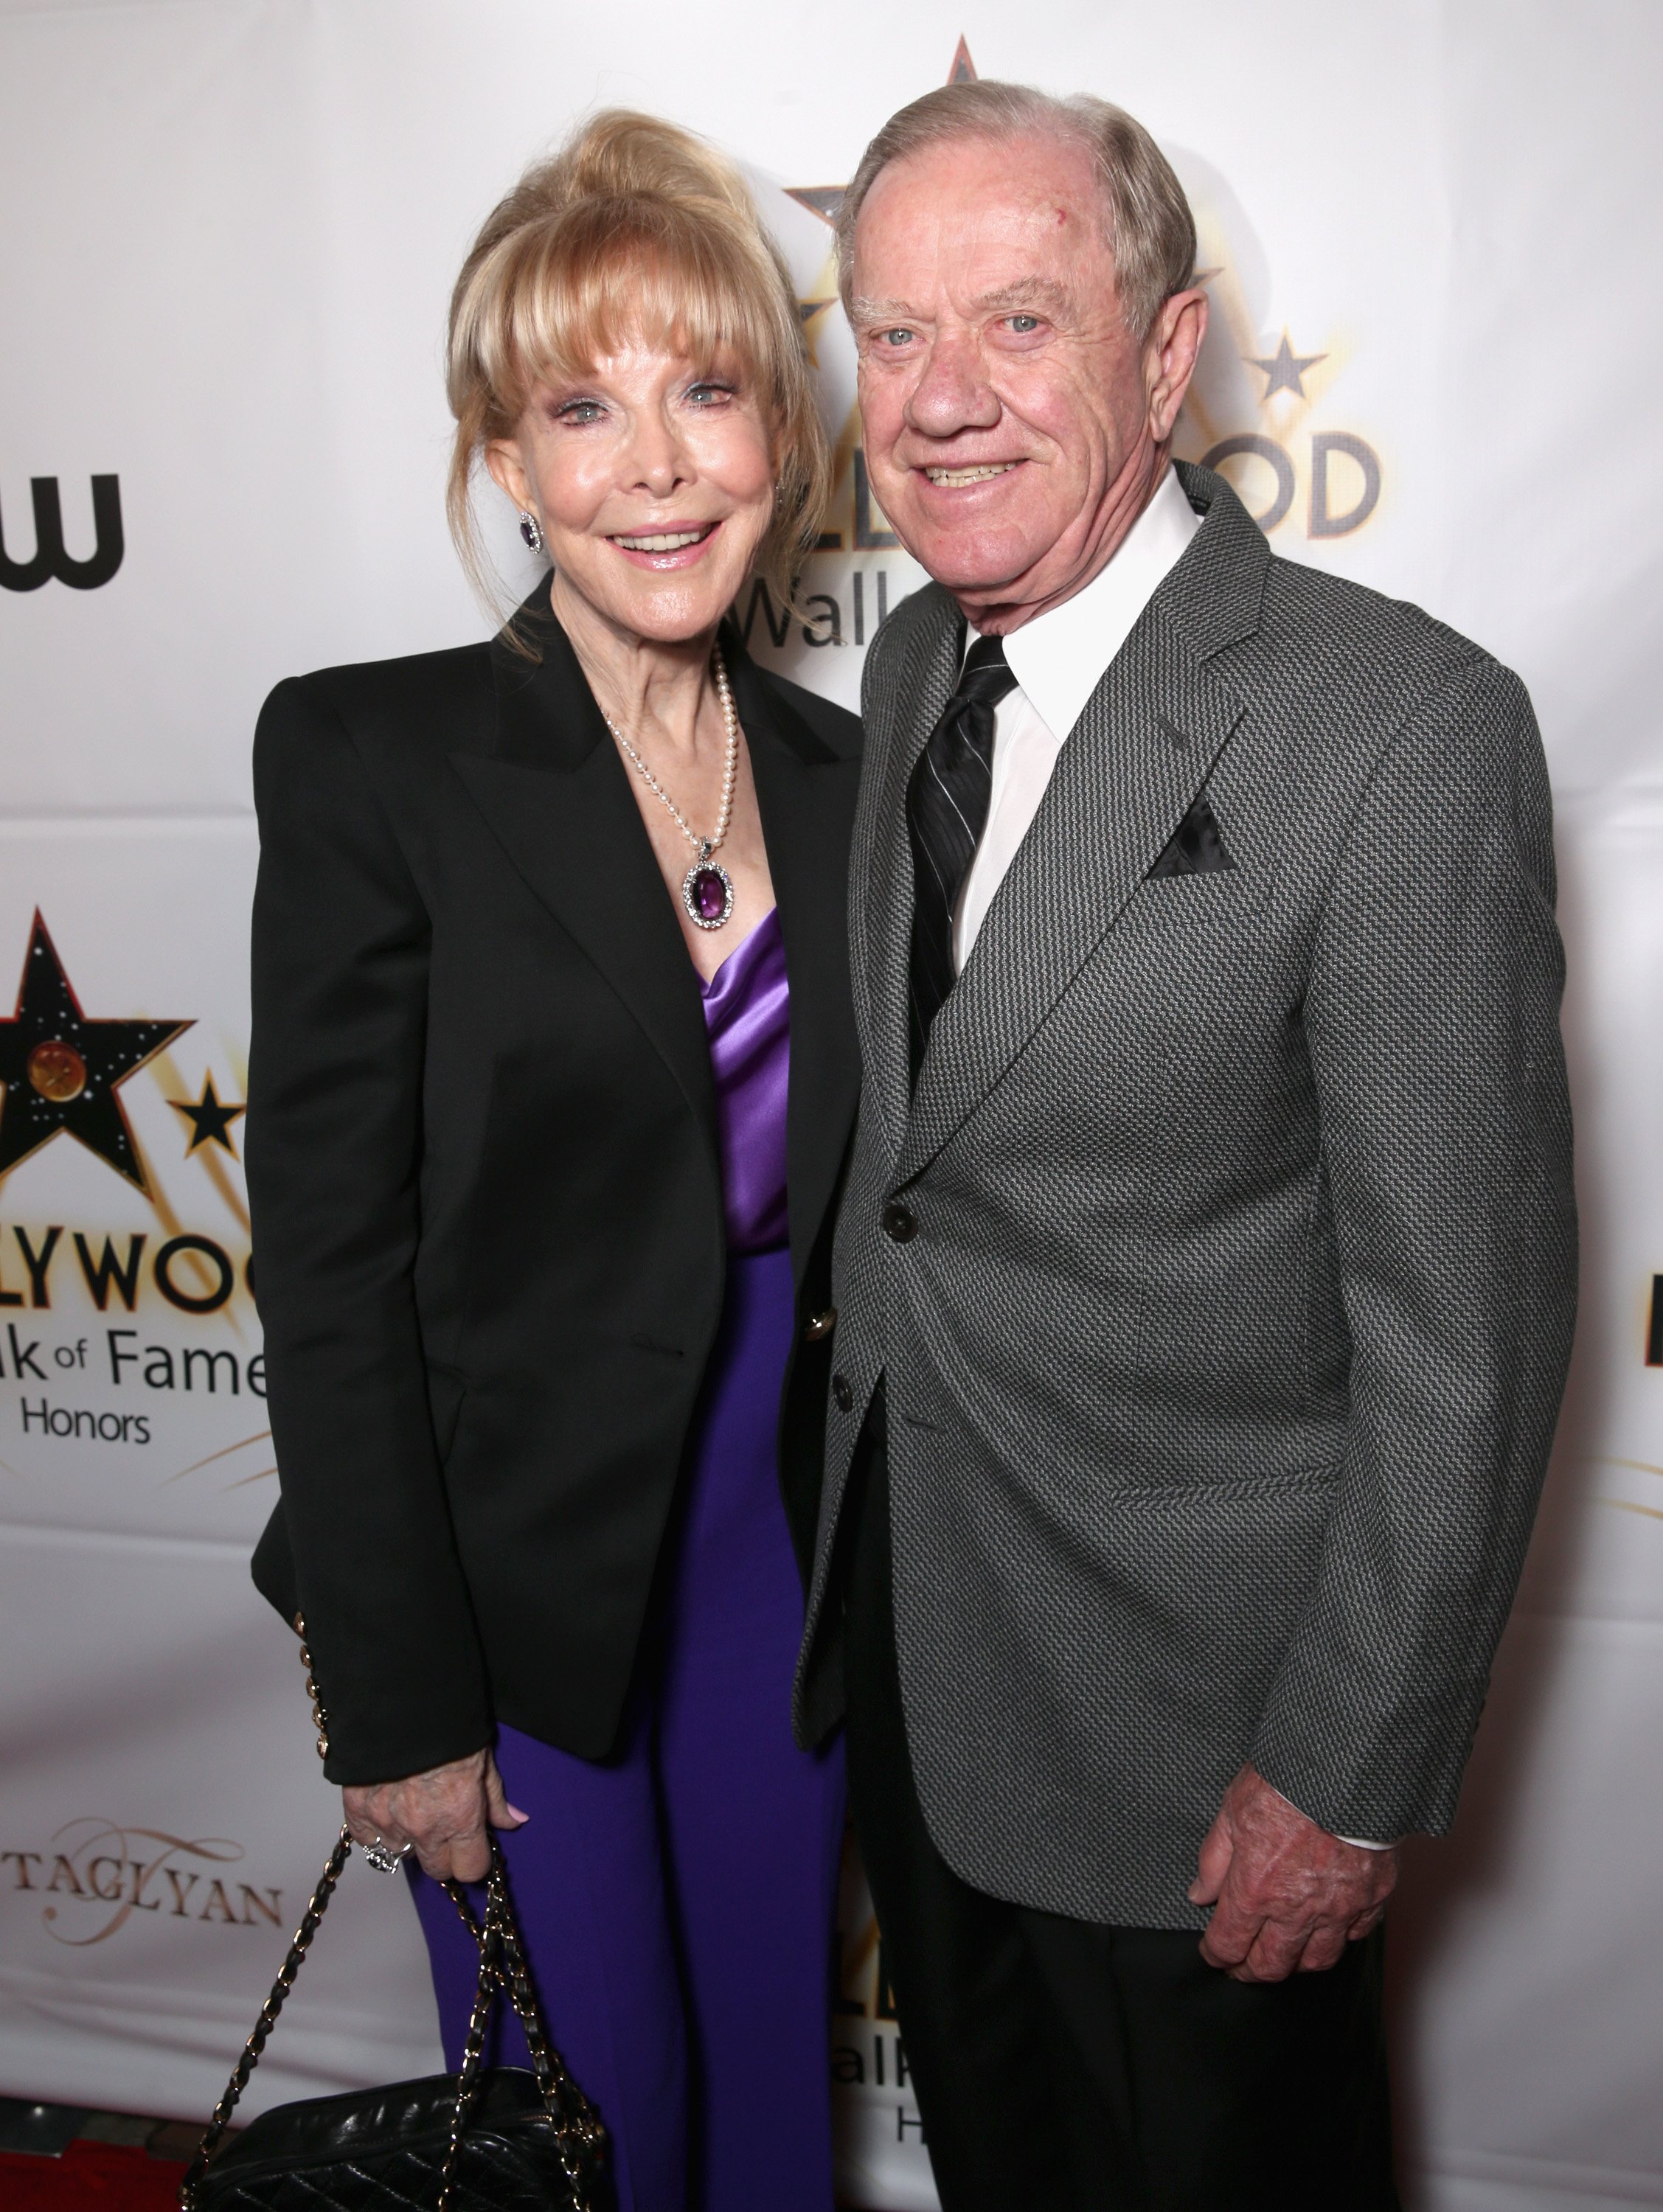 Barbara Eden and Jon Eicholtz at the Hollywood Walk of Fame Honors on October 25, 2016, in California. | Source: Getty Images